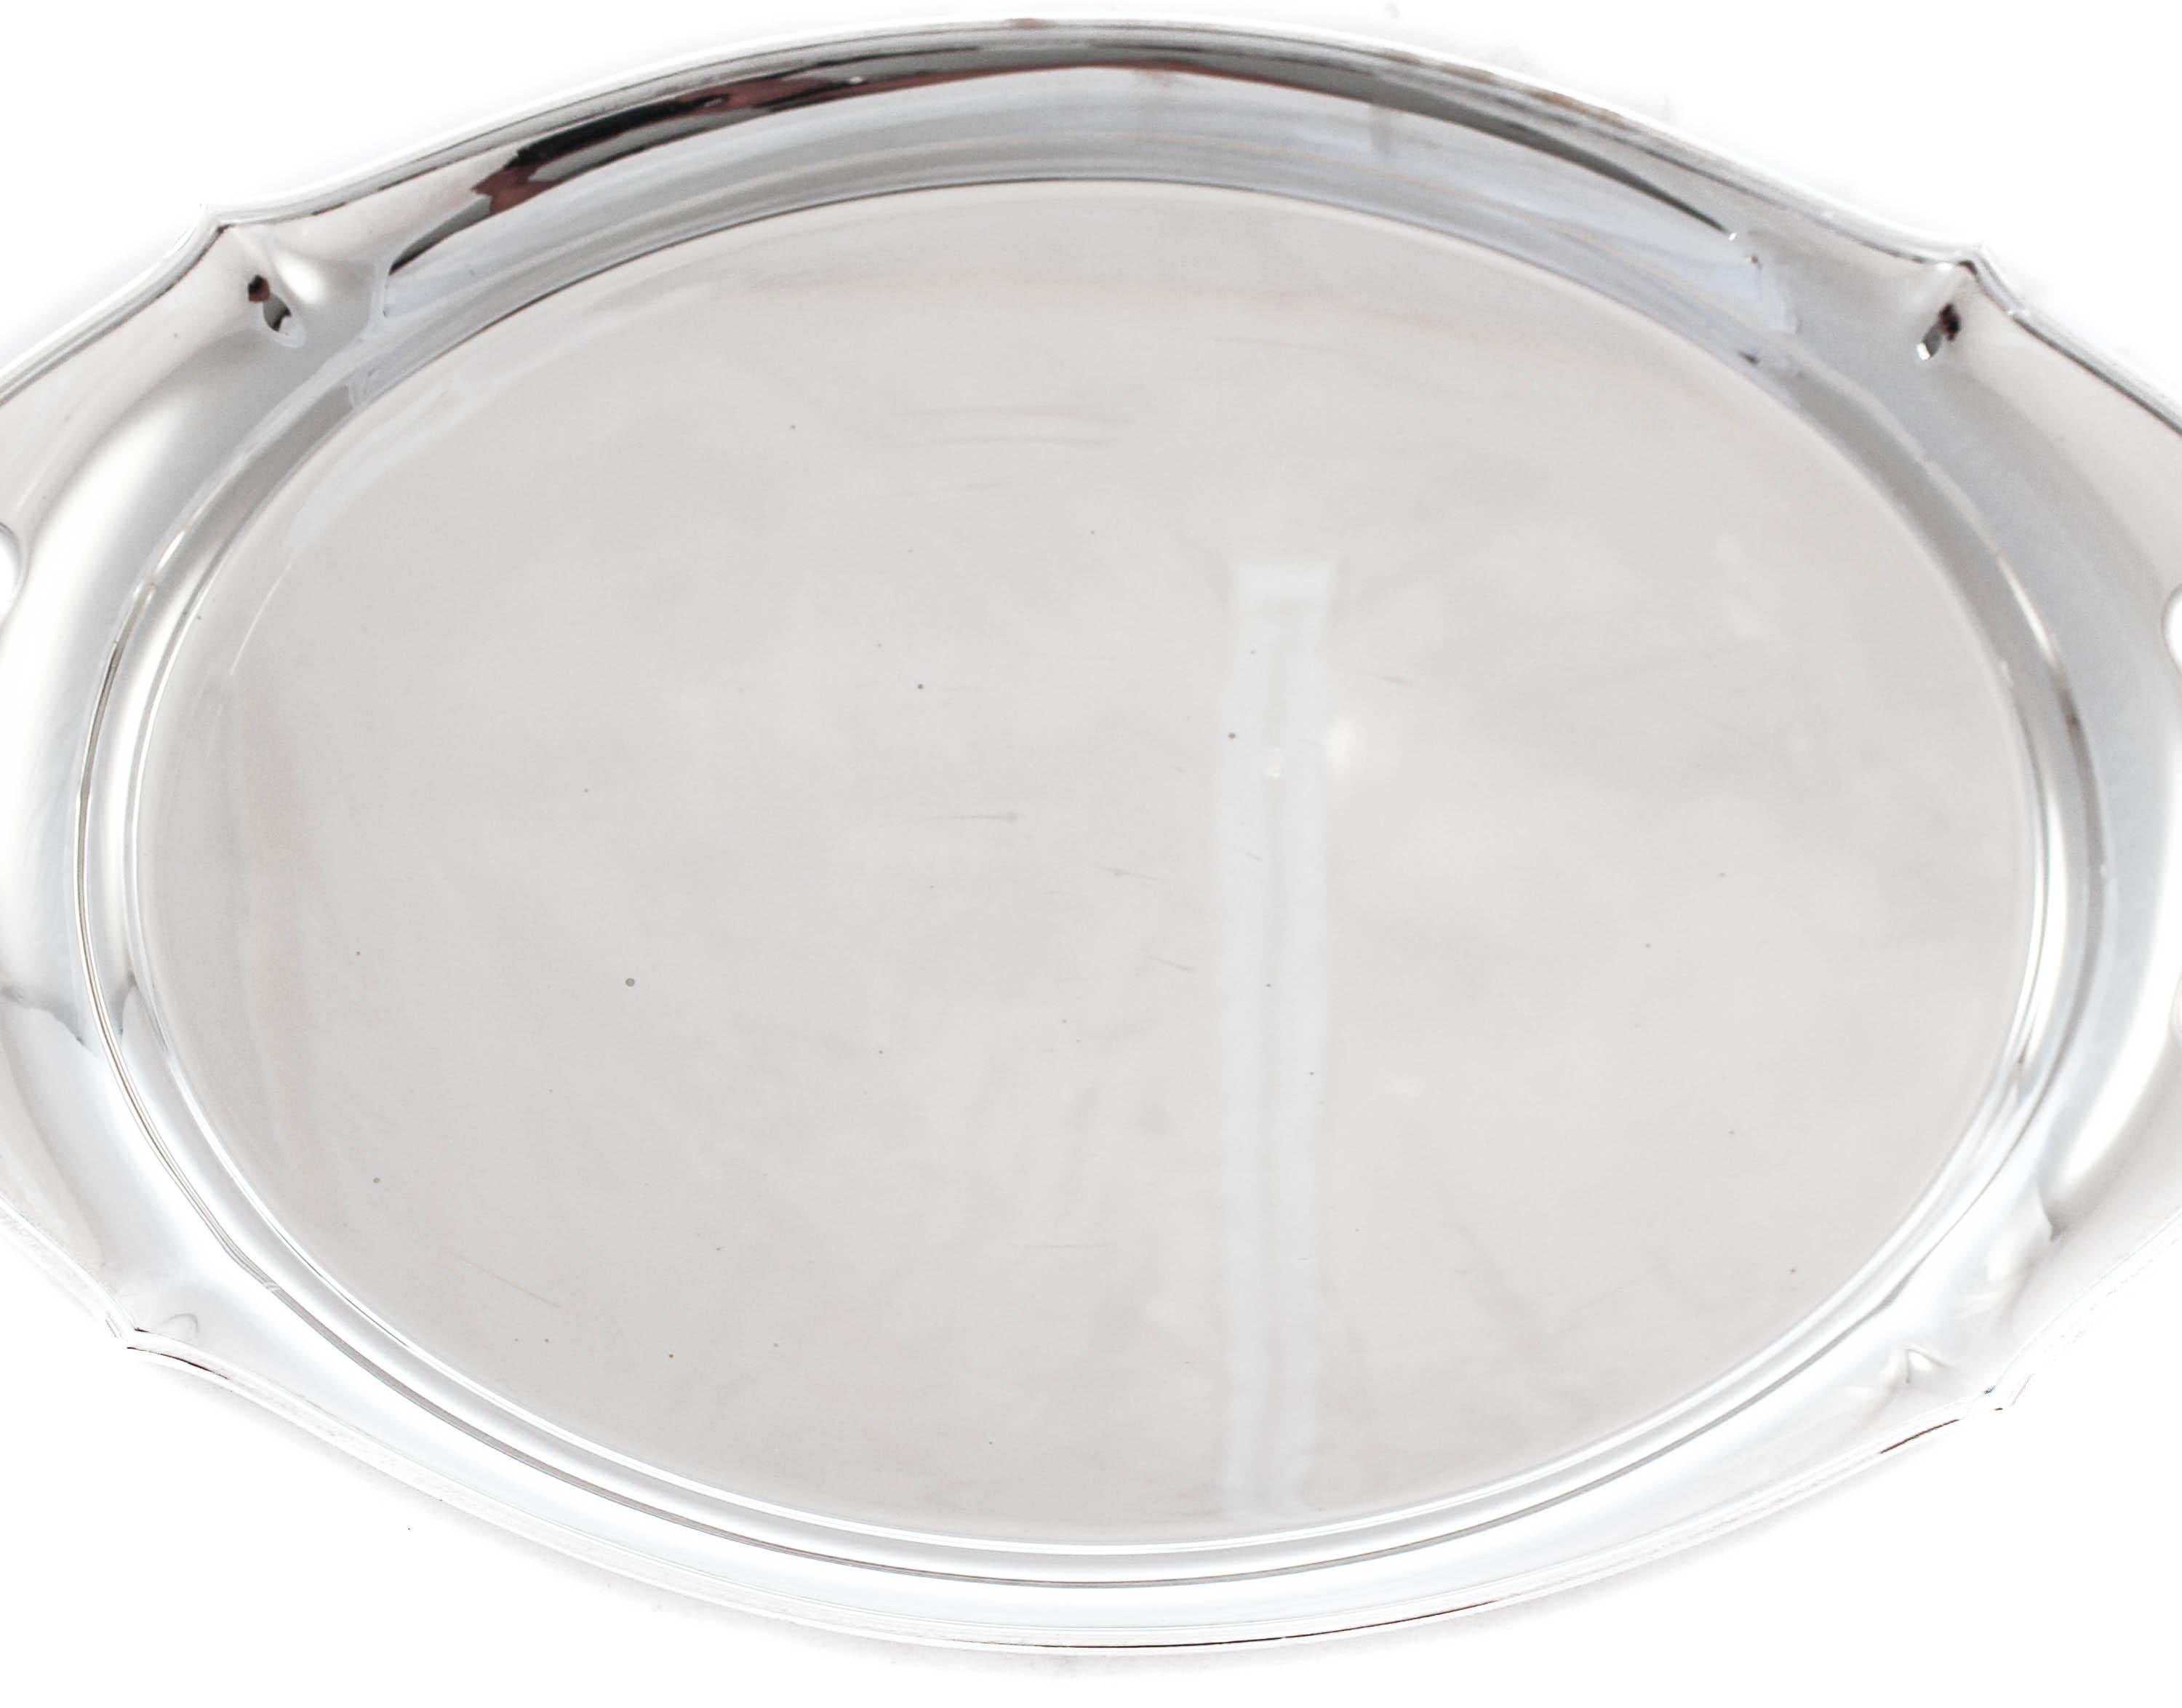 We are thrilled to offer this sterling silver tray by the Gorham Silver Company of Rhode Island, signed 1917. One hundred and three years old, this beautiful tray has been privy to many a family dinner and holiday festivities. It has a scalloped rim